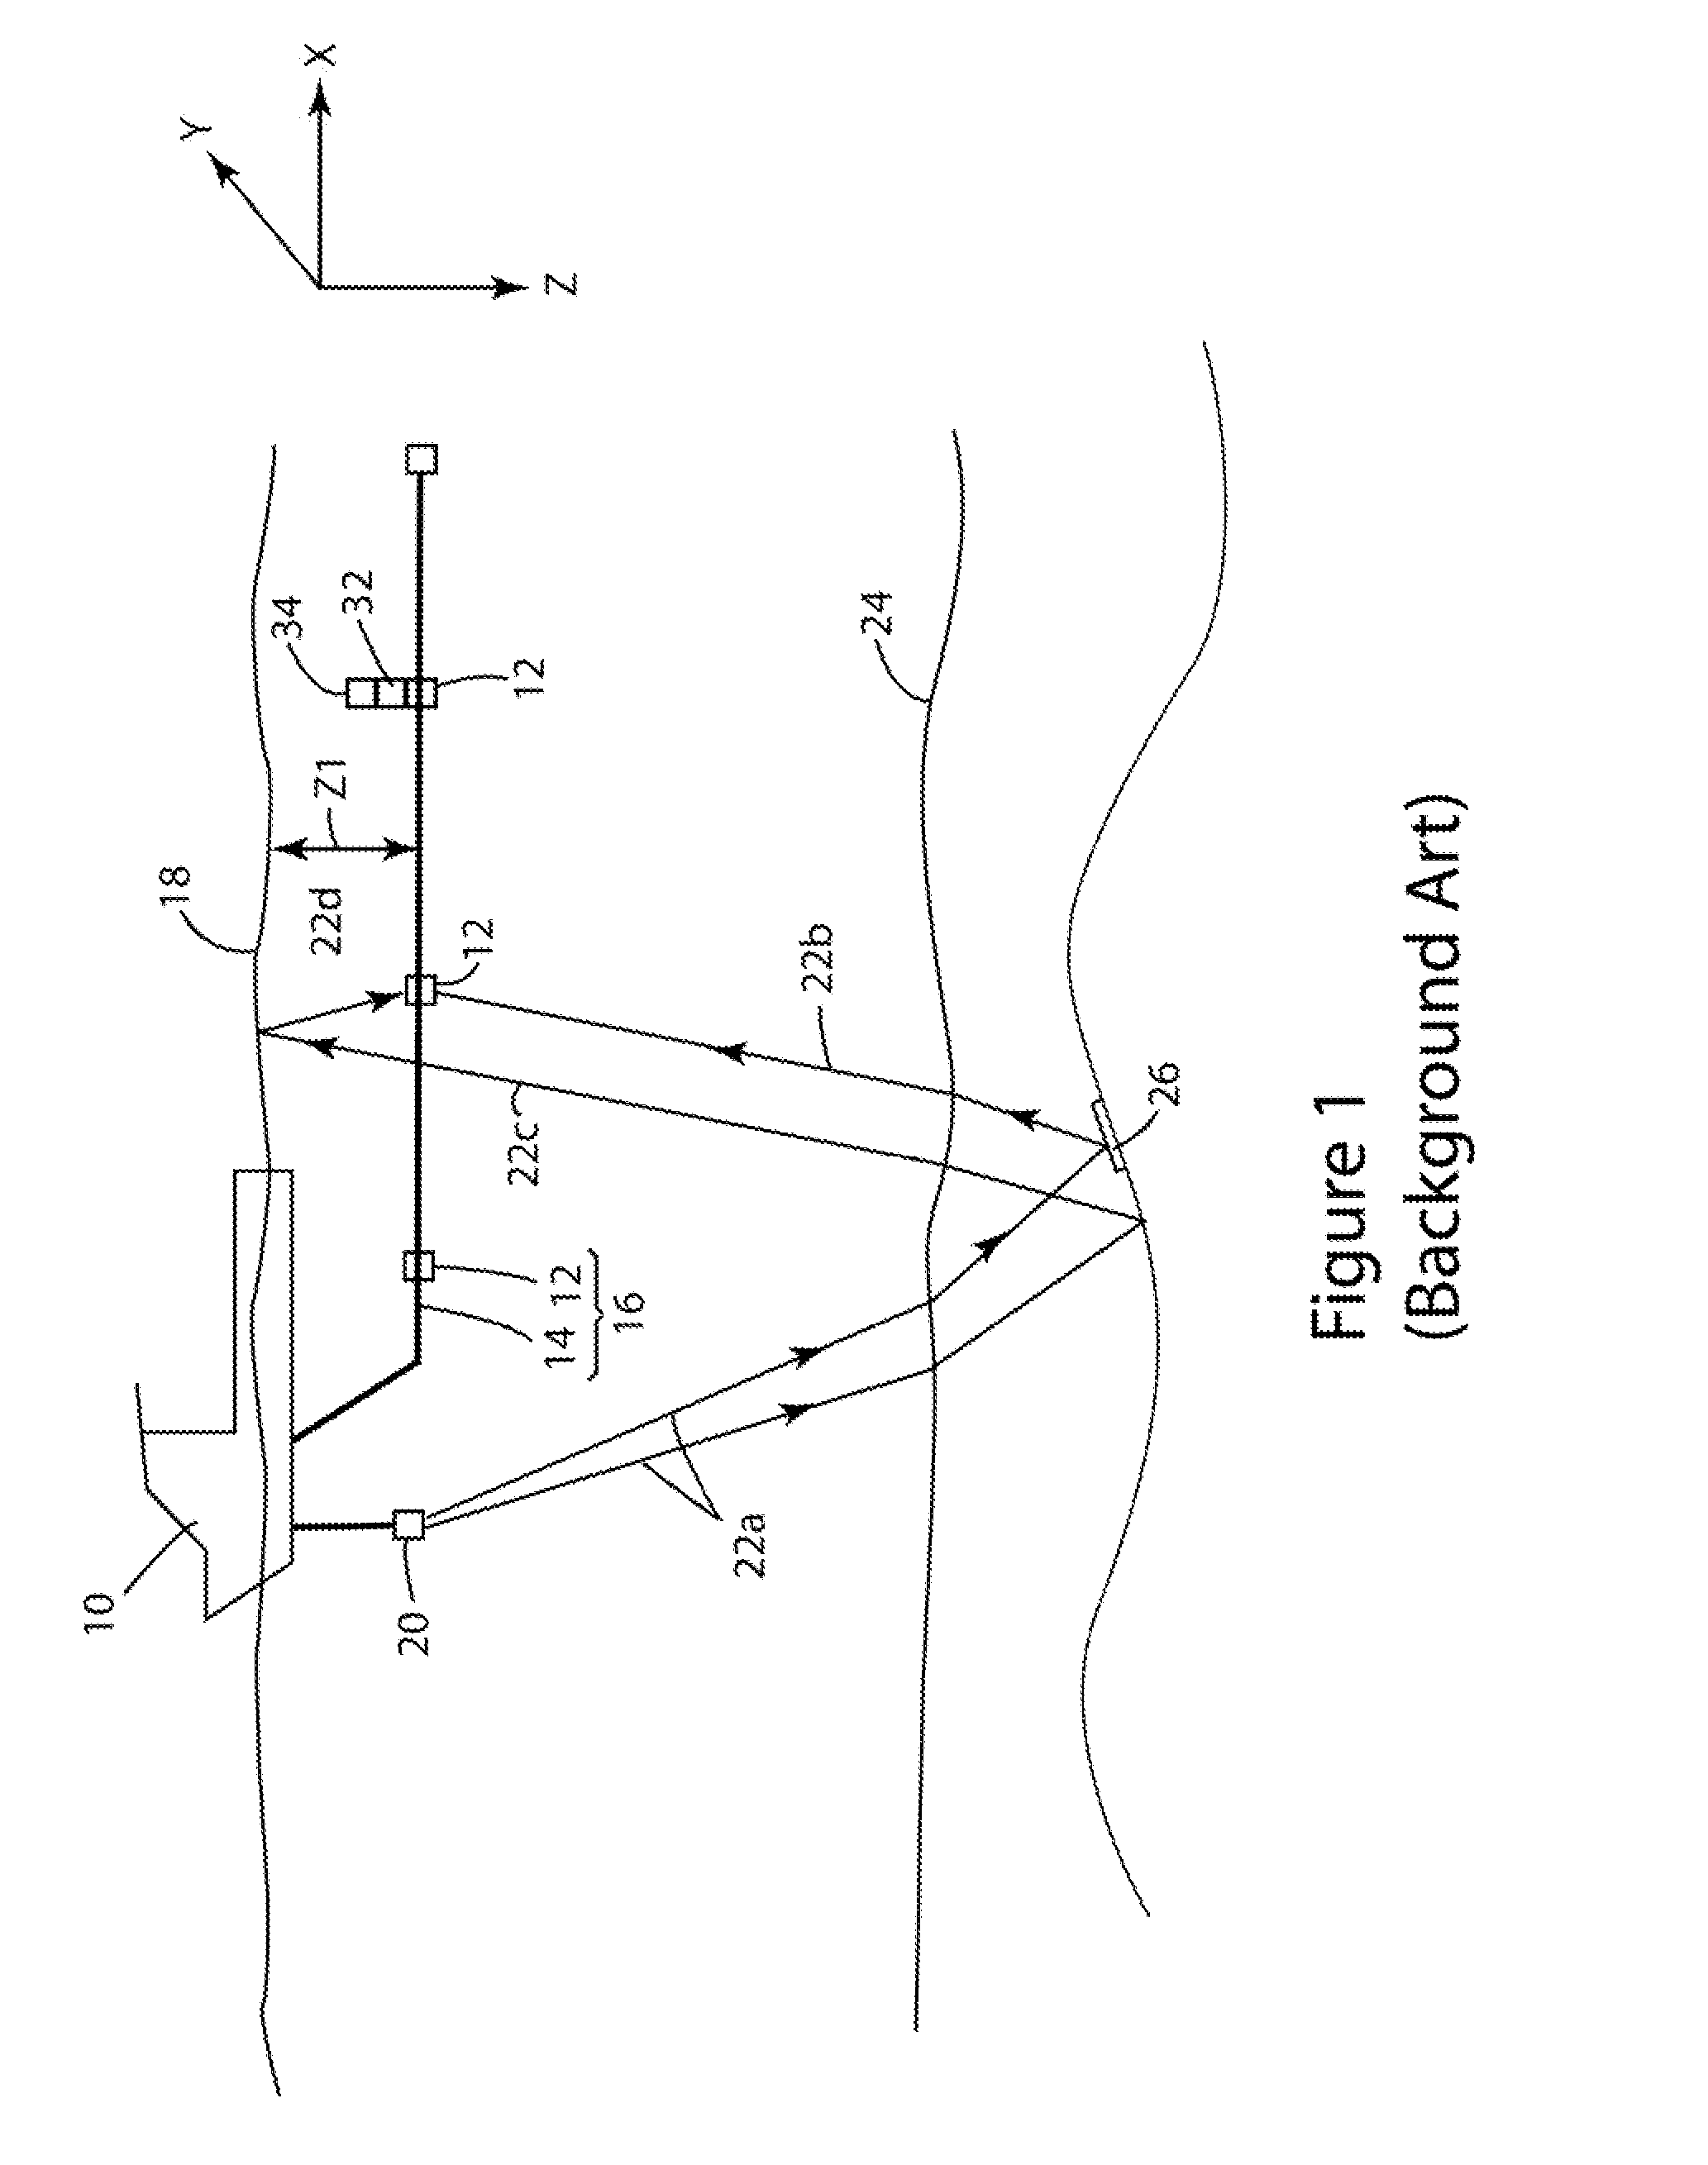 Method and device for alternating depths marine seismic acquisition